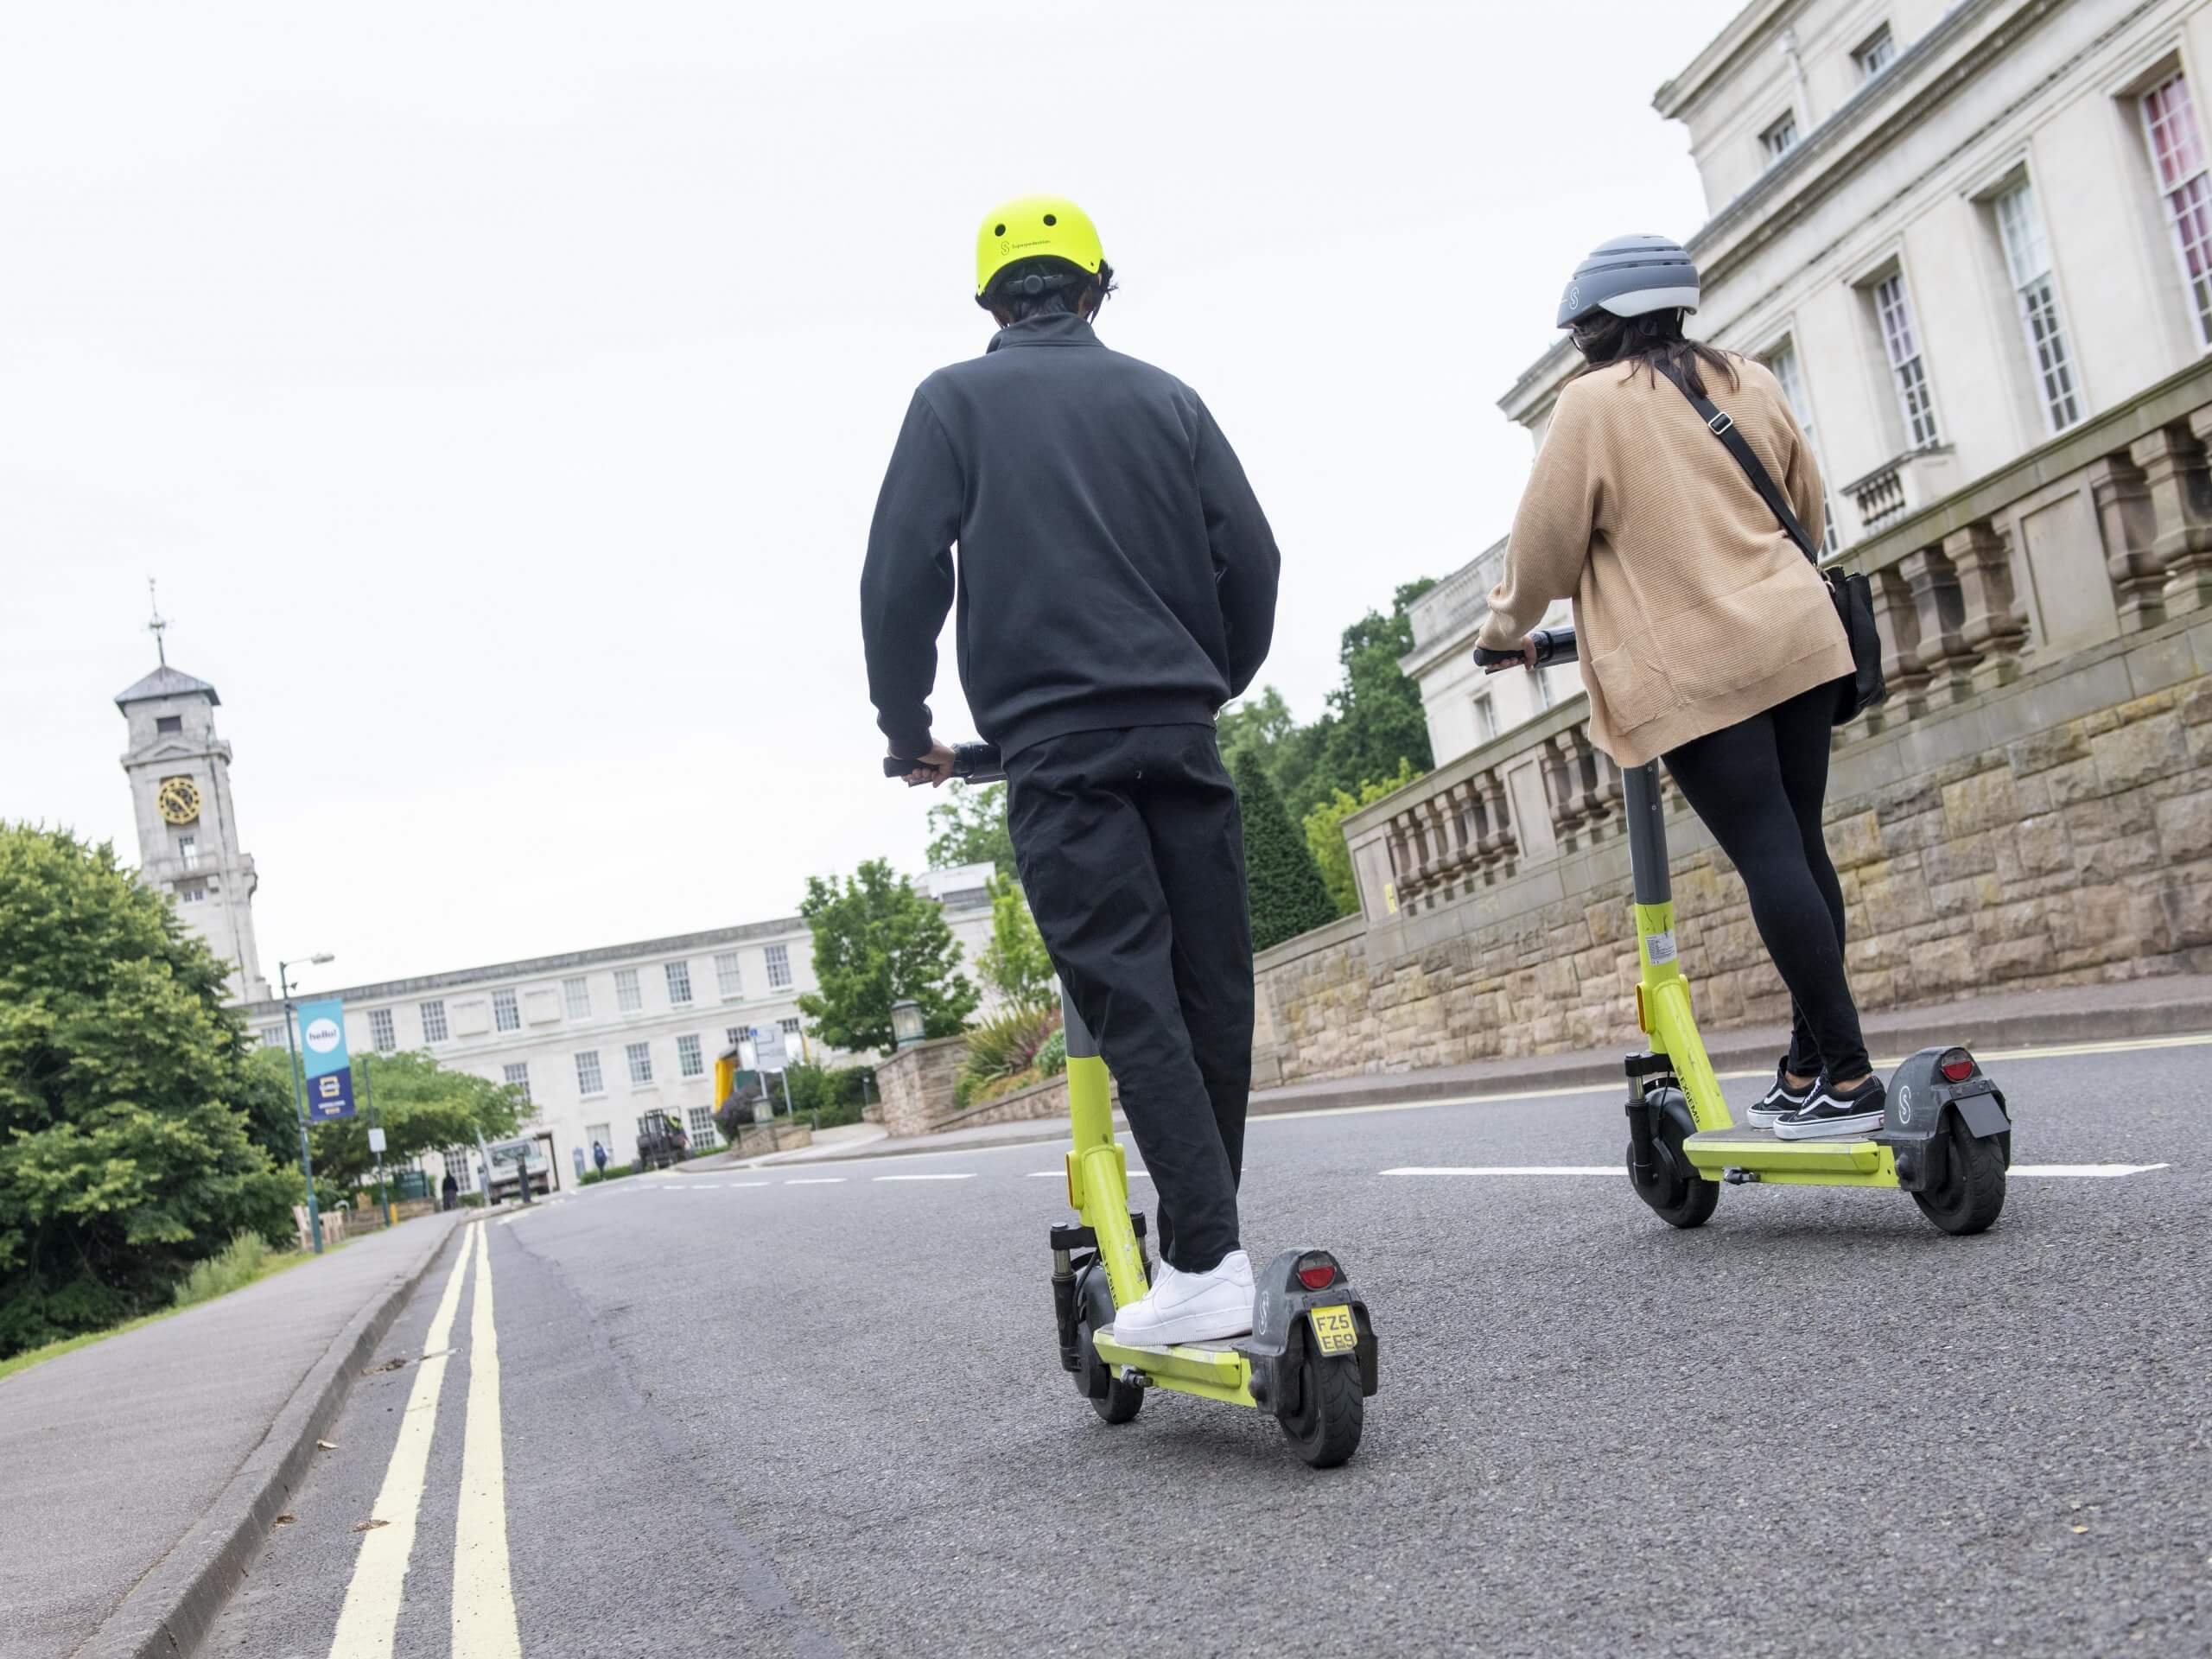 Two students on e-scooters on the University of Nottingham campus